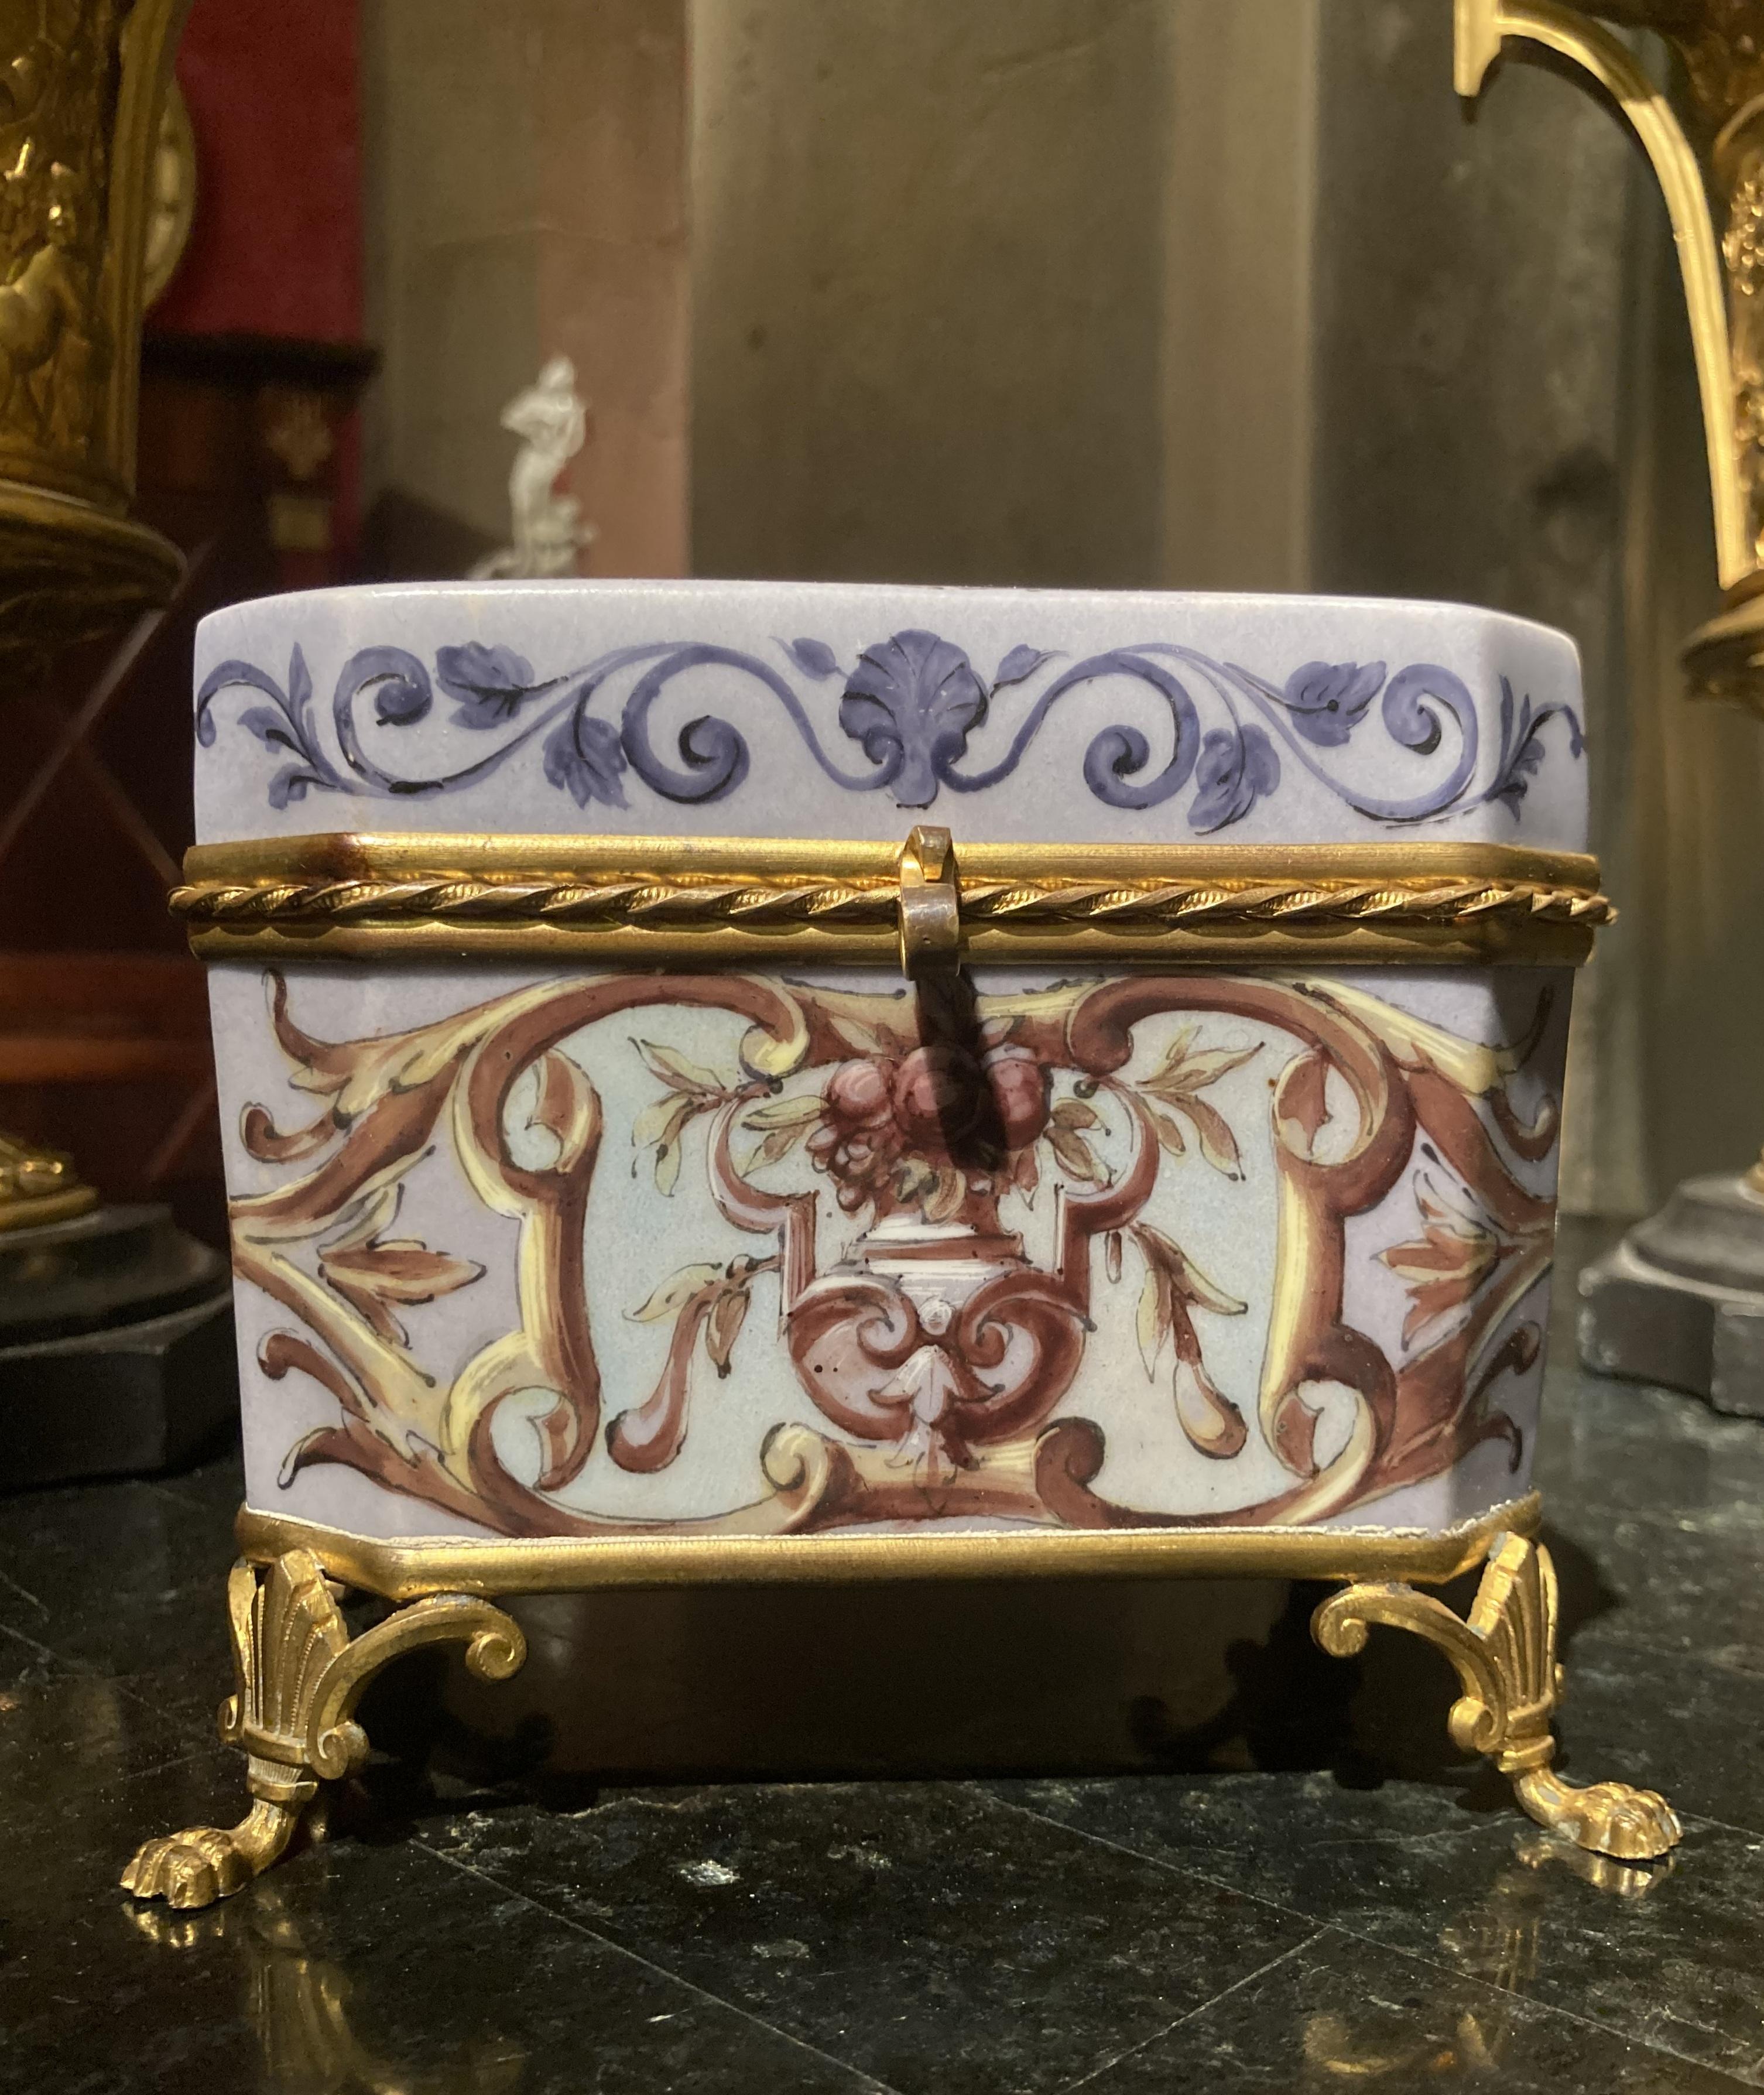 French 19th Century Empire Porcelain and Gilt Bronze Decorative Jewelry Box For Sale 2